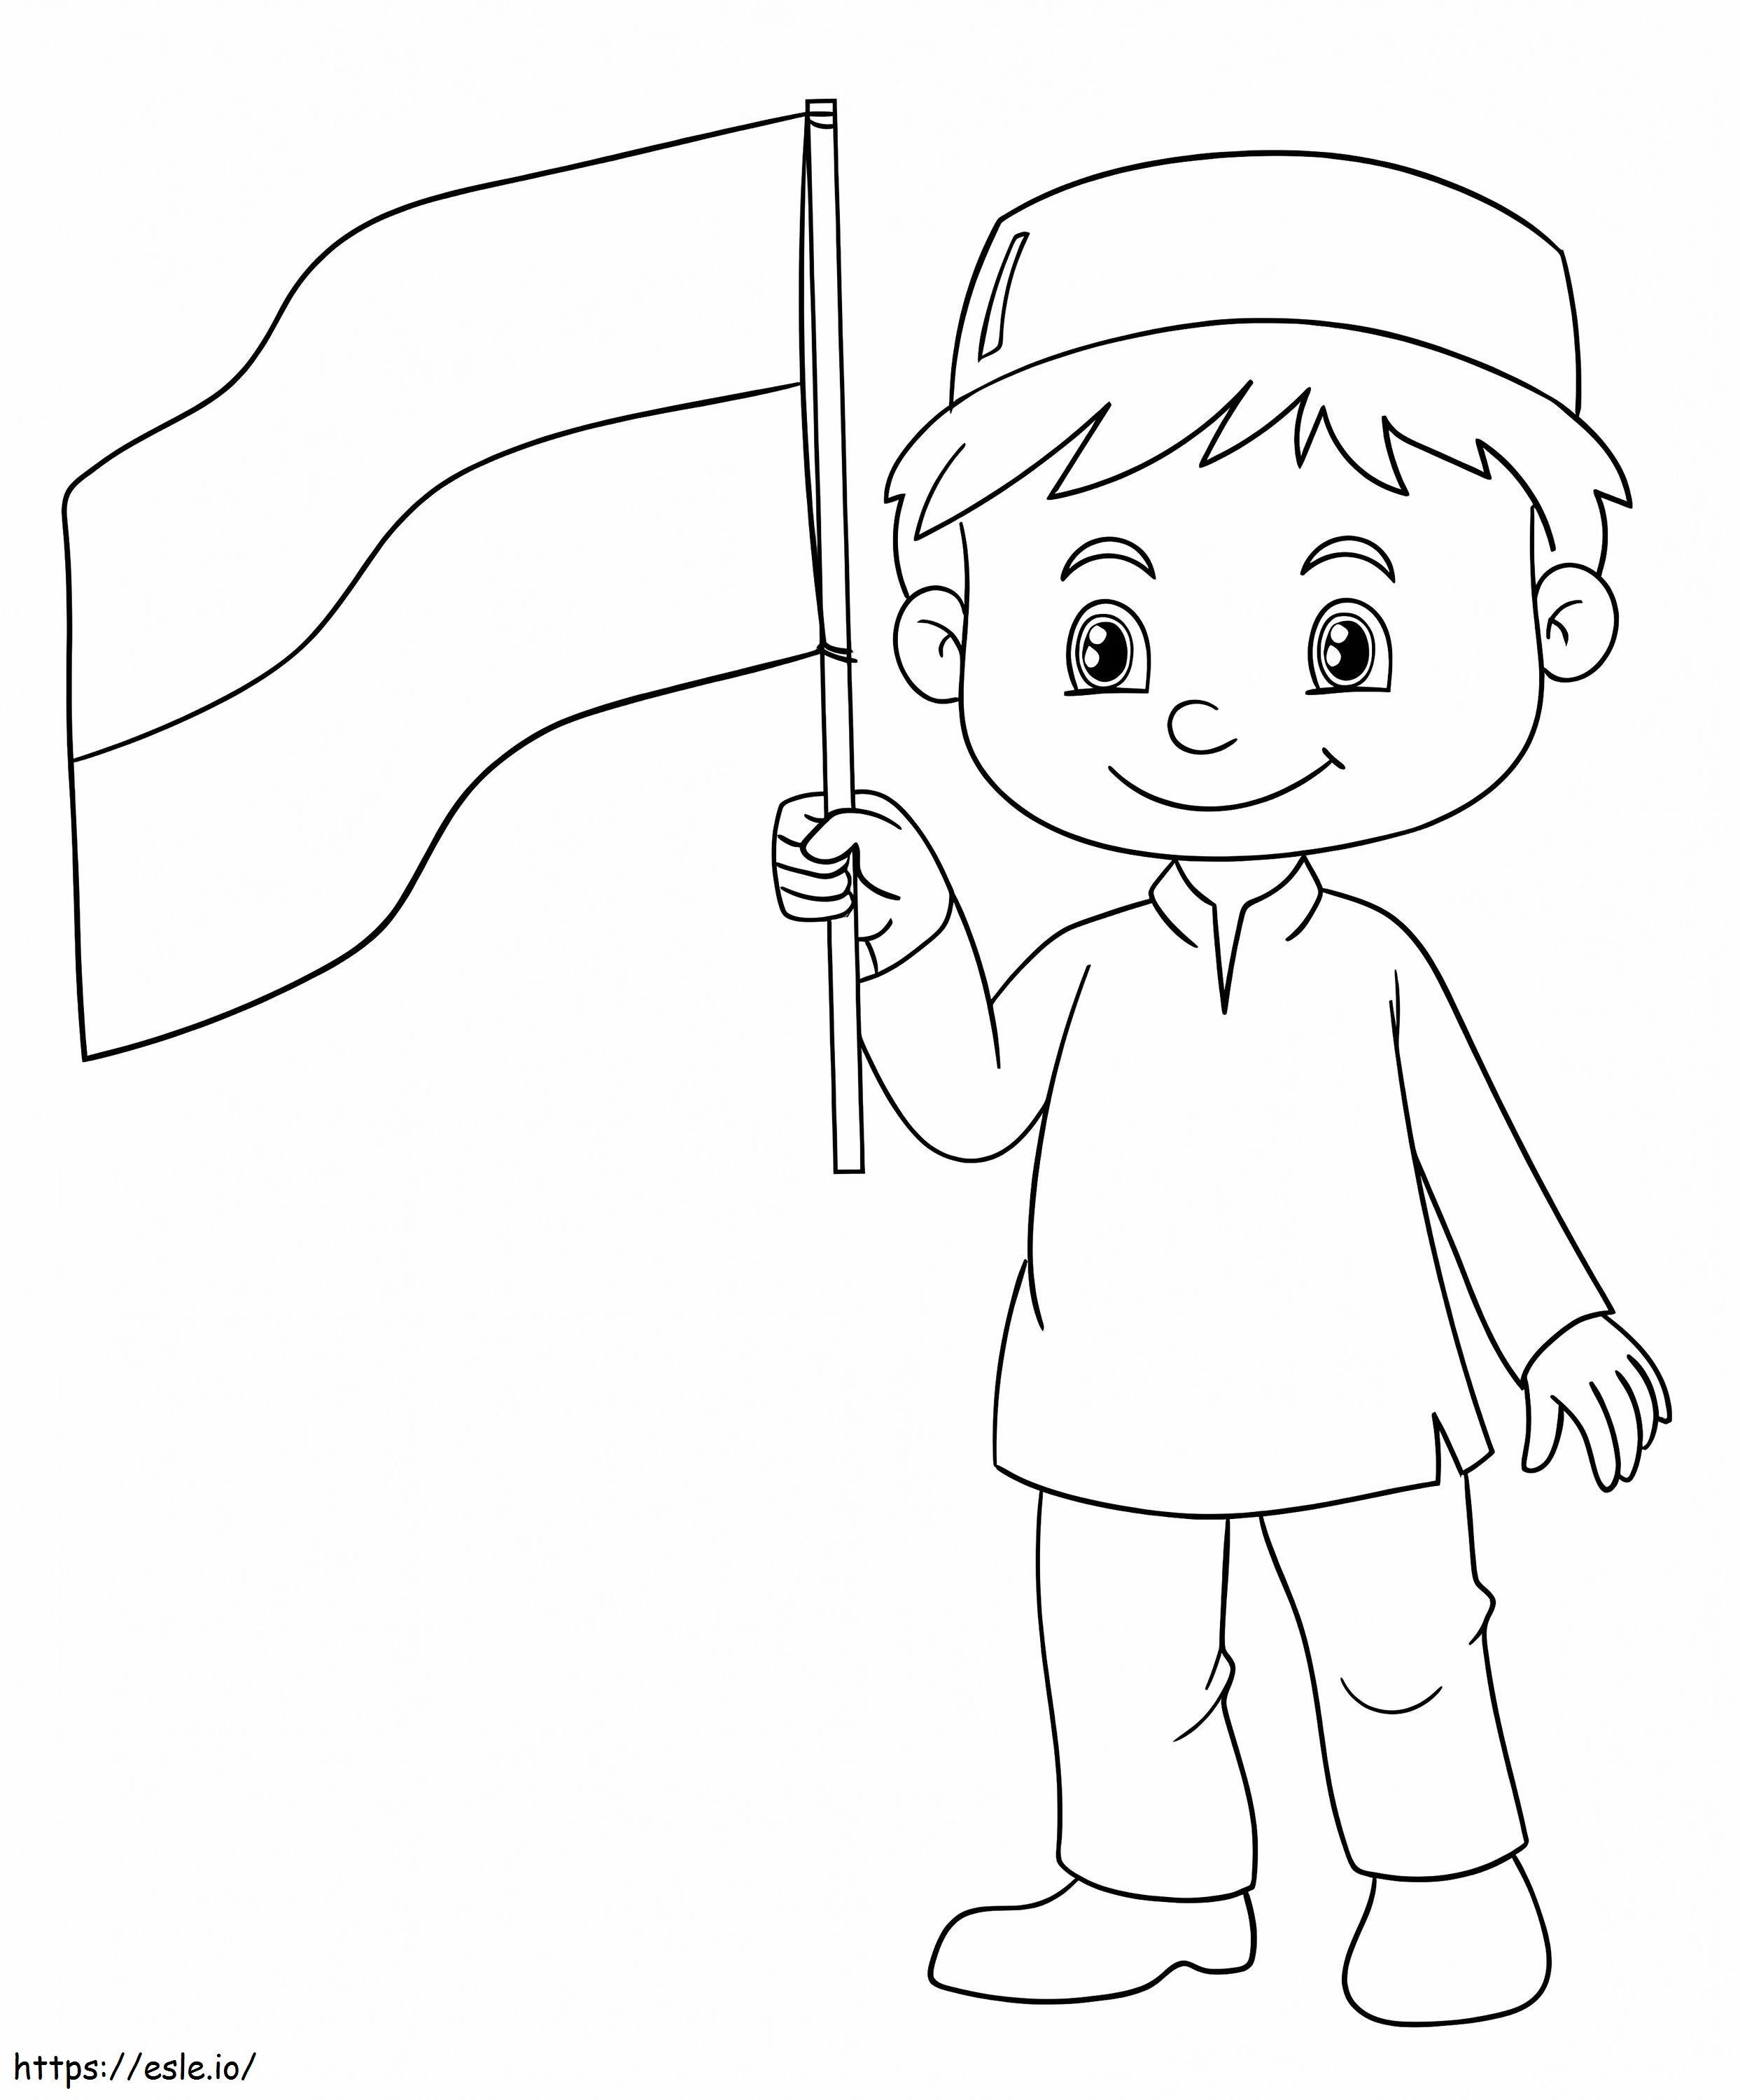 Indonesian Boy coloring page